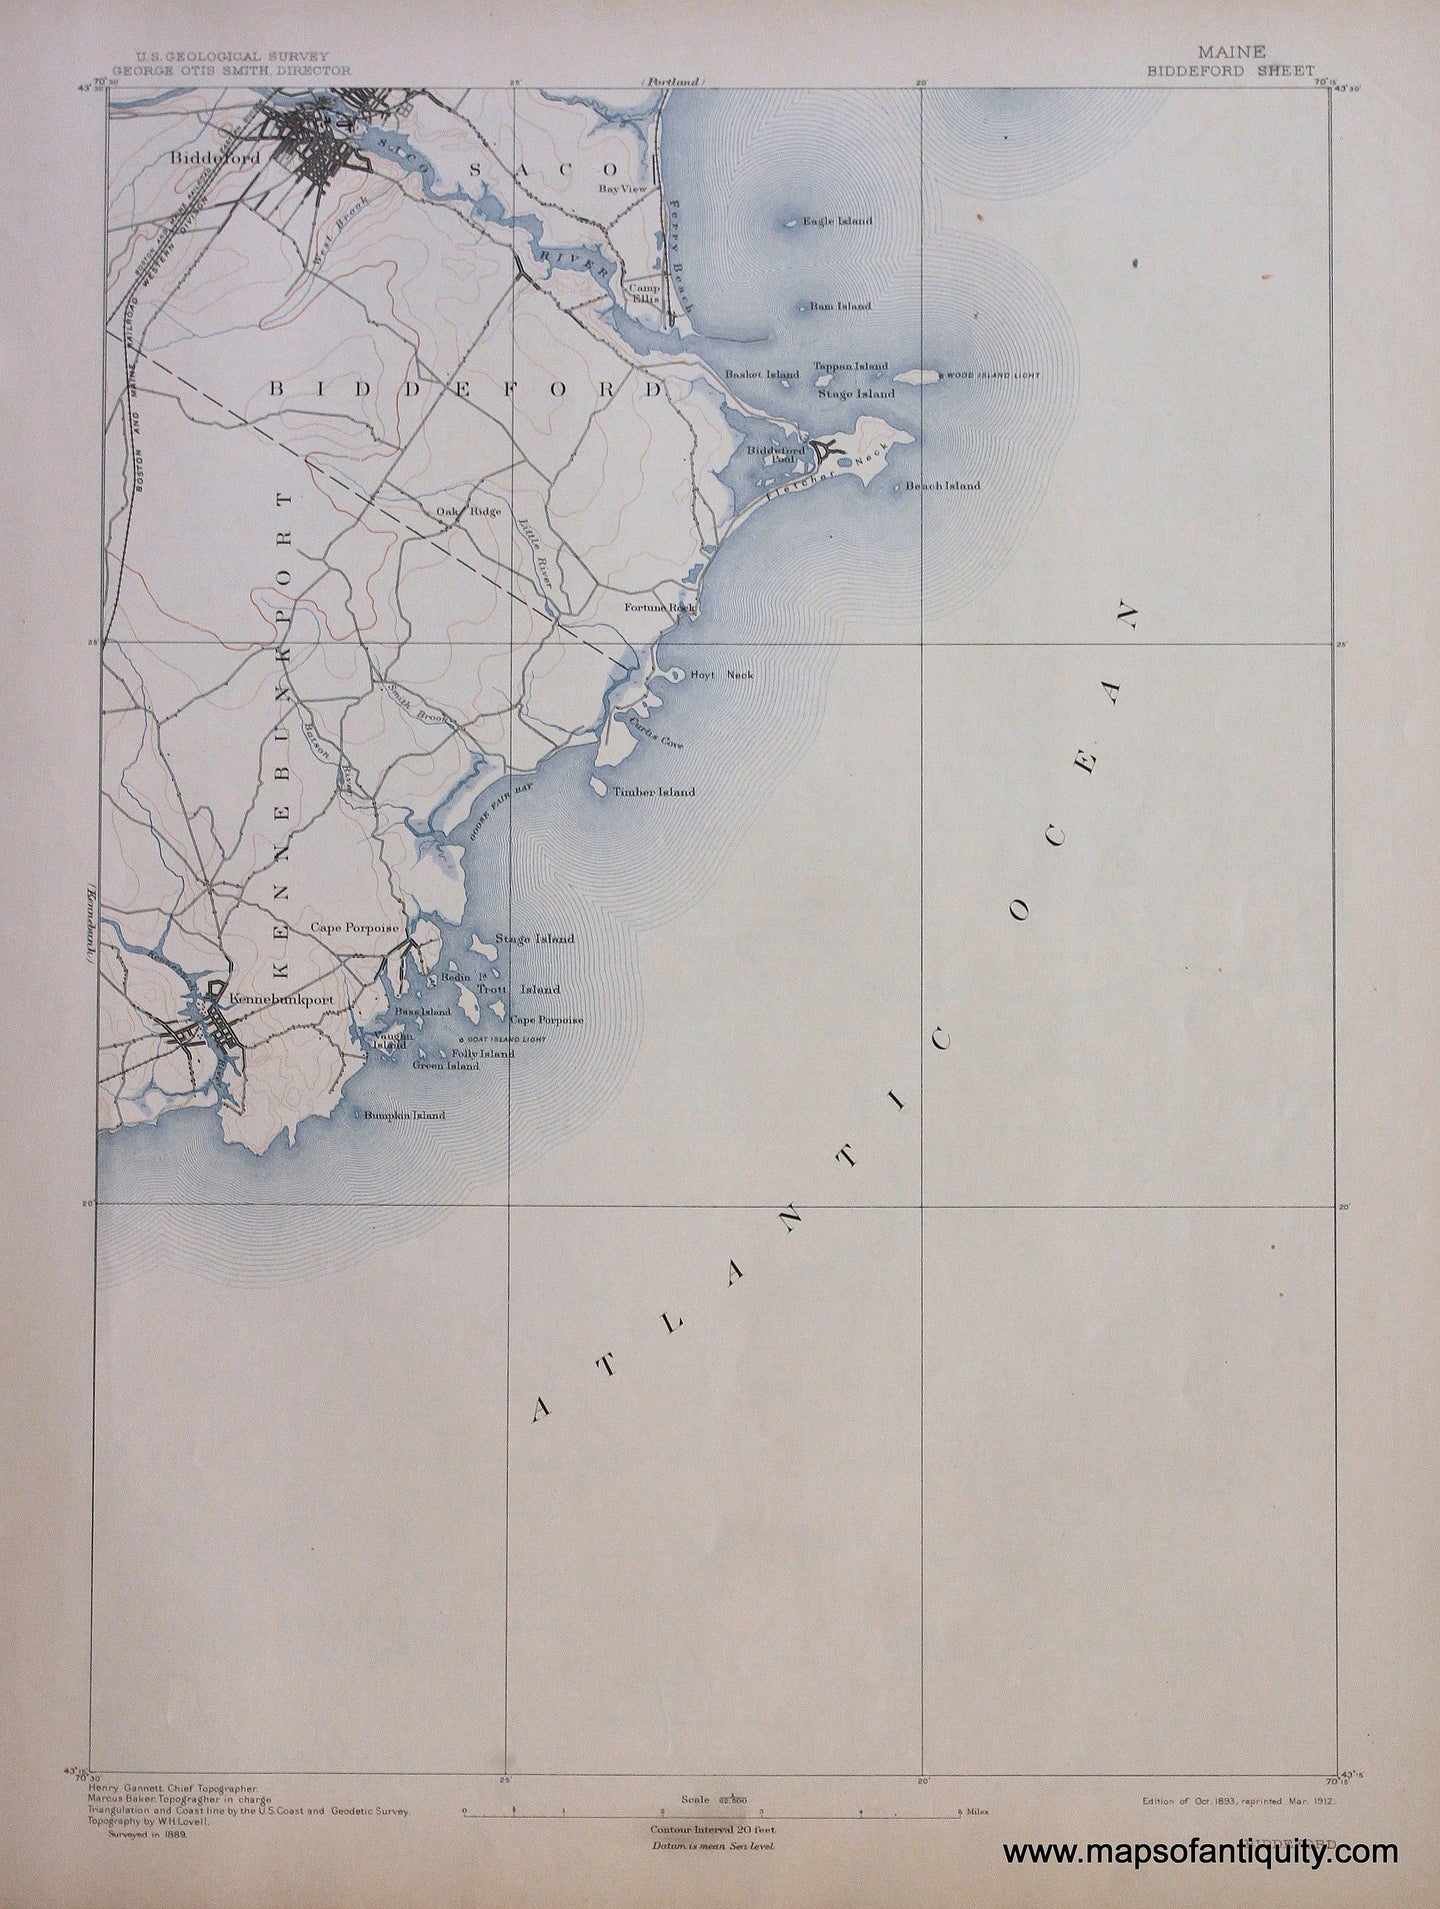 Genuine-Antique-Map-Biddeford-Maine--1912-US-Geological-Survey--Maps-Of-Antiquity